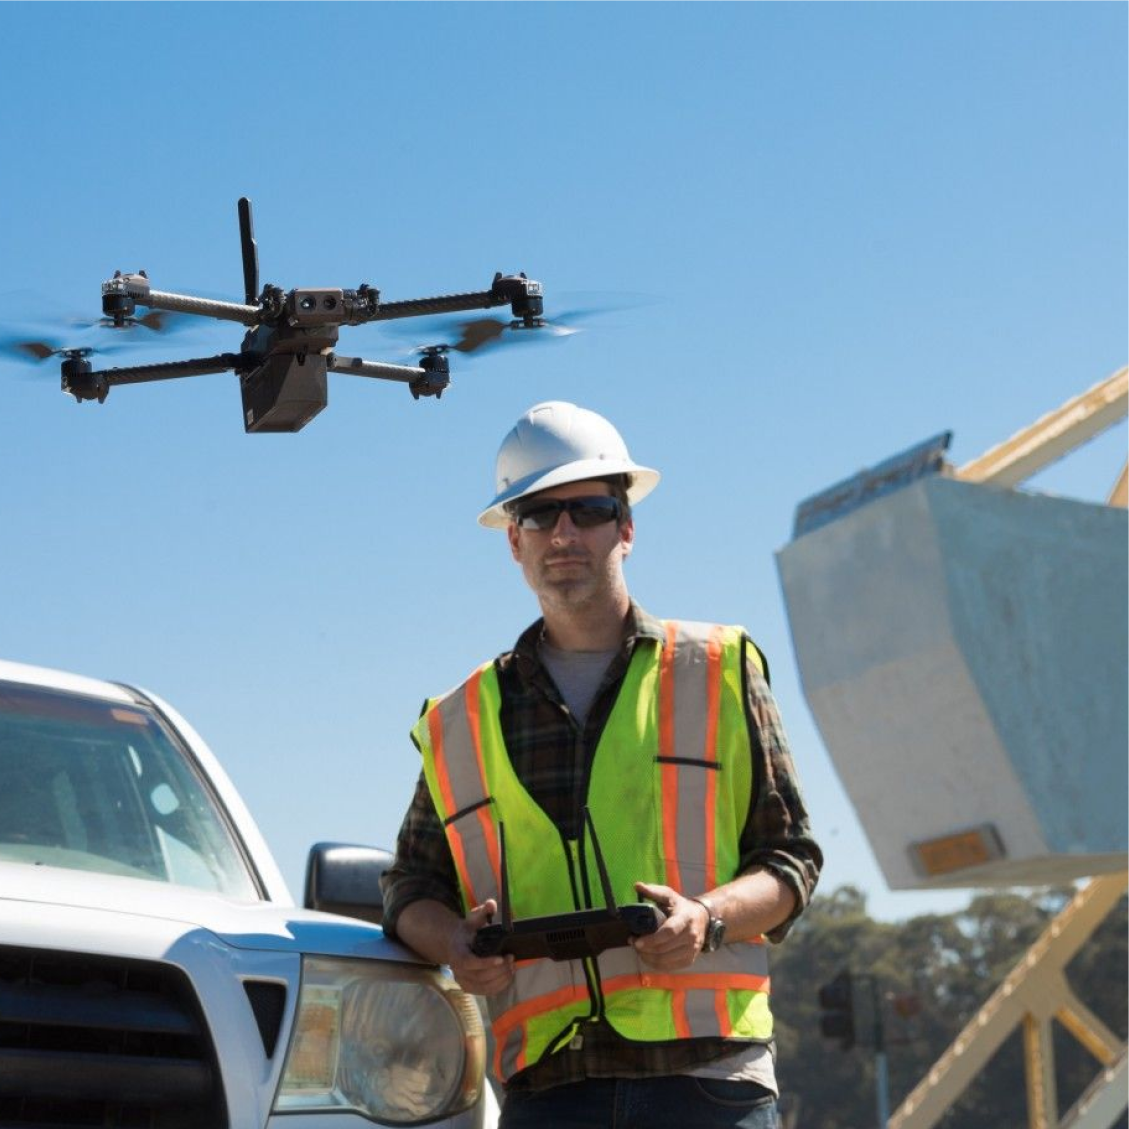 Construction drone pilot flying skydio